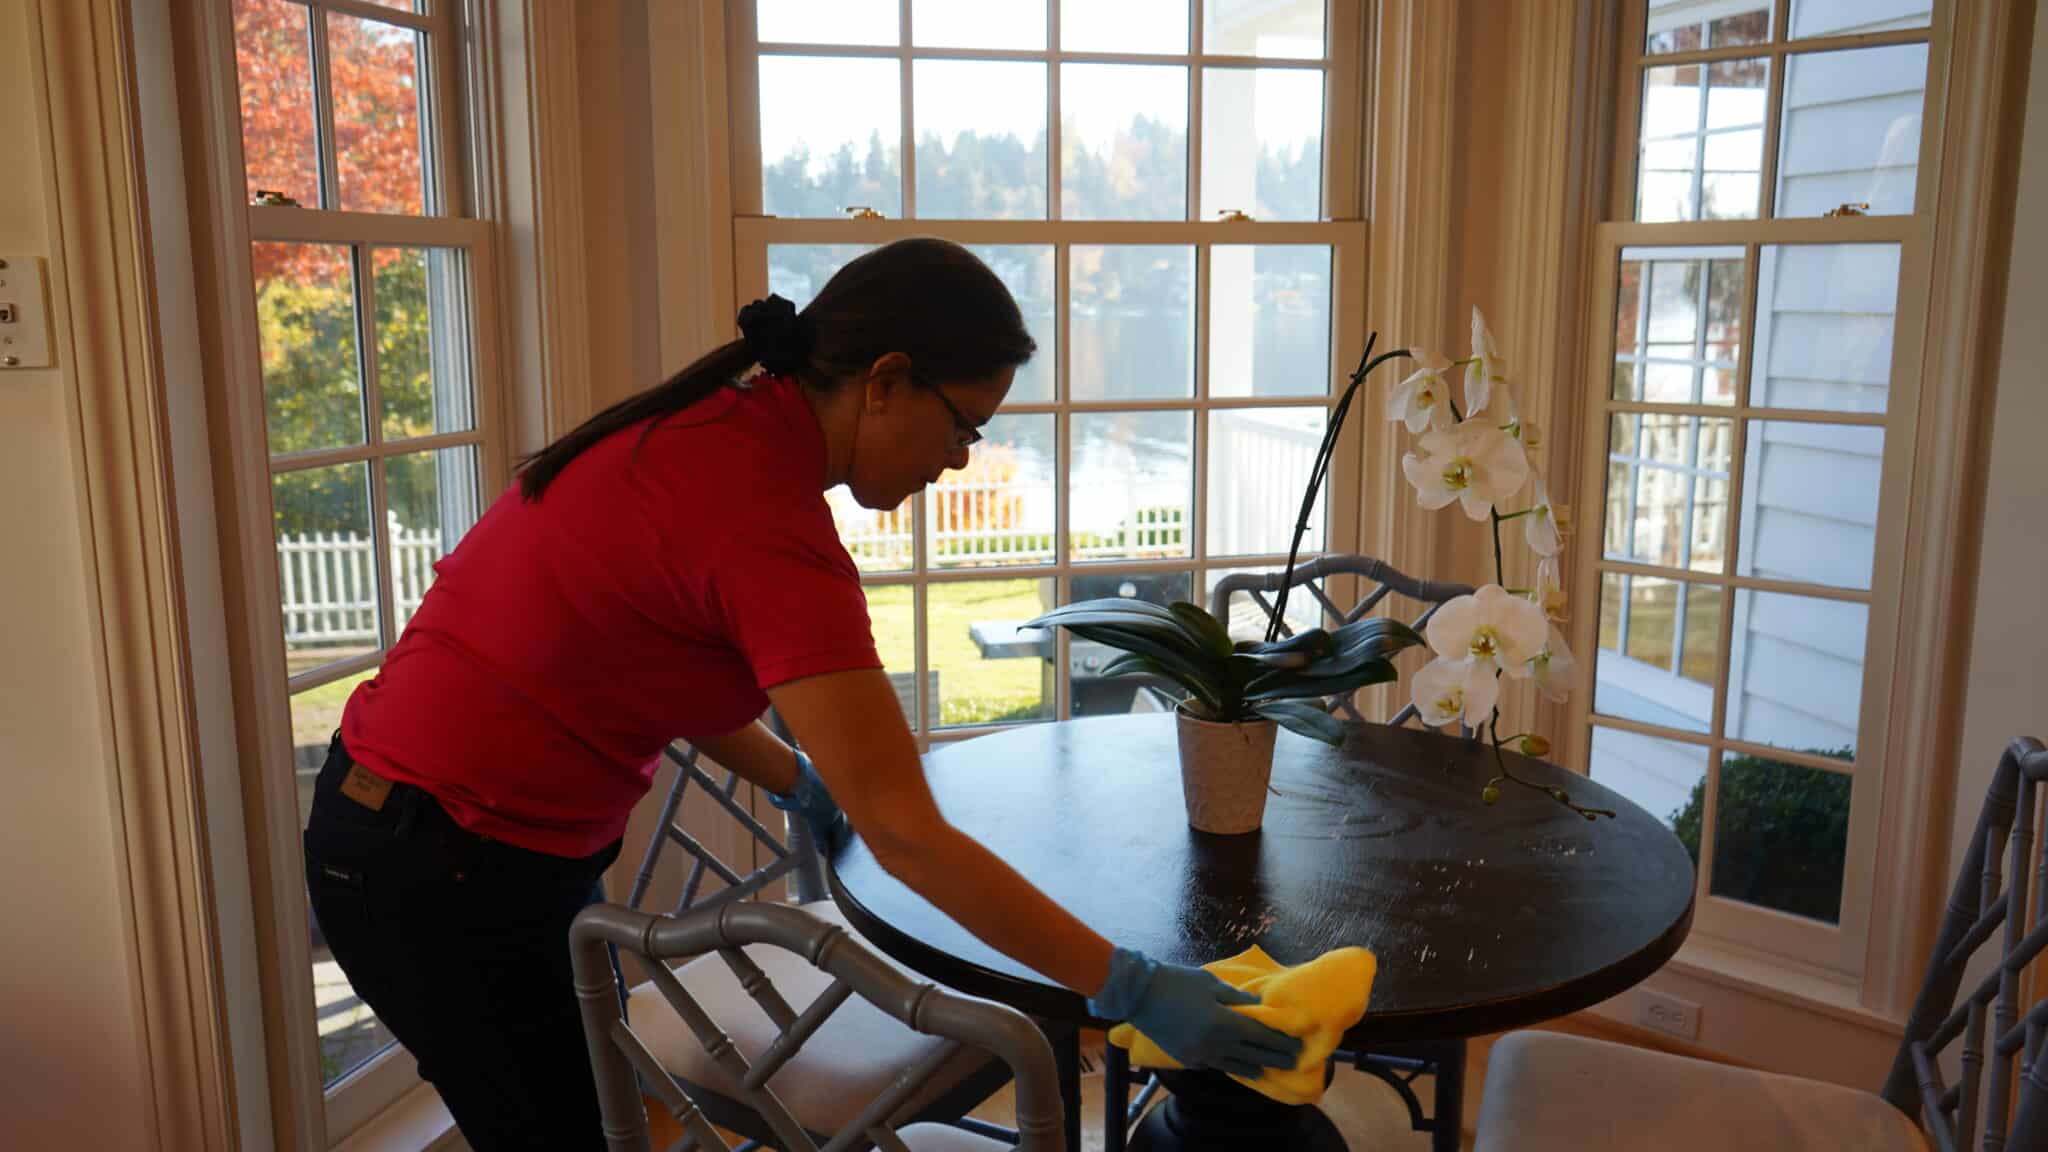 luxury cleaning services